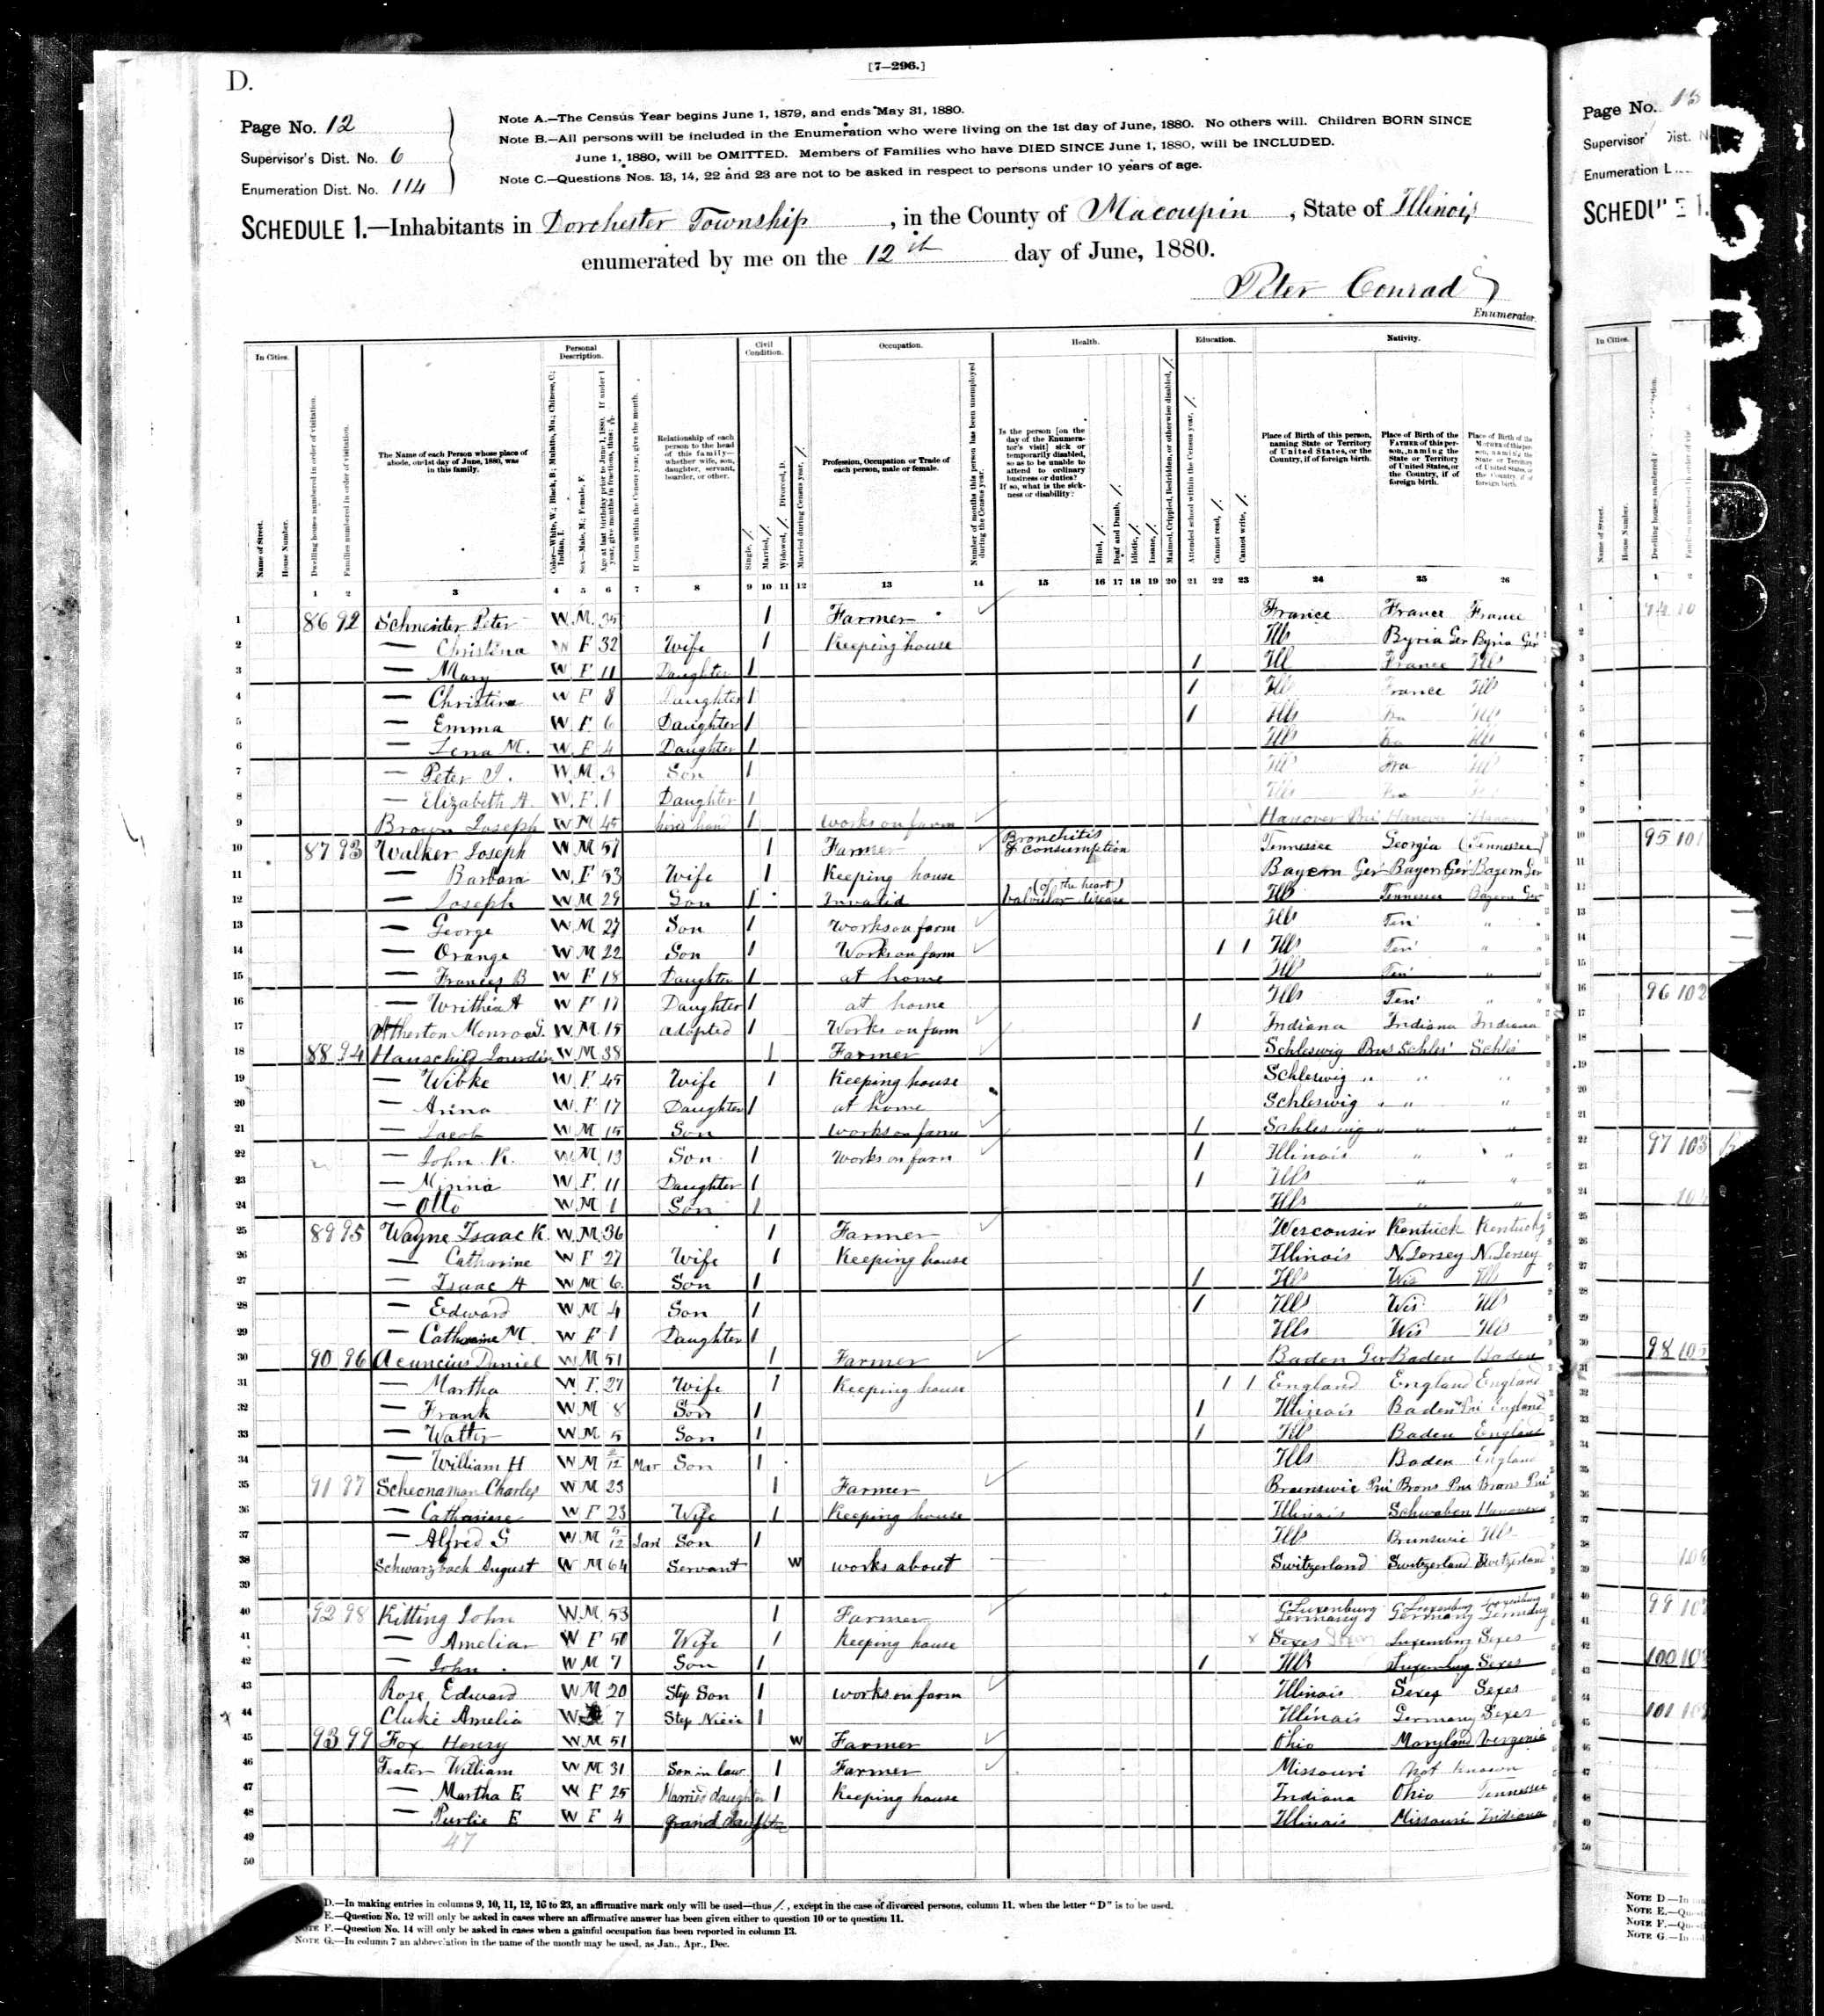 Joseph Walker (son of Jacob Walker and Agnes McLean), 1880 Macoupin County, Illinois, census